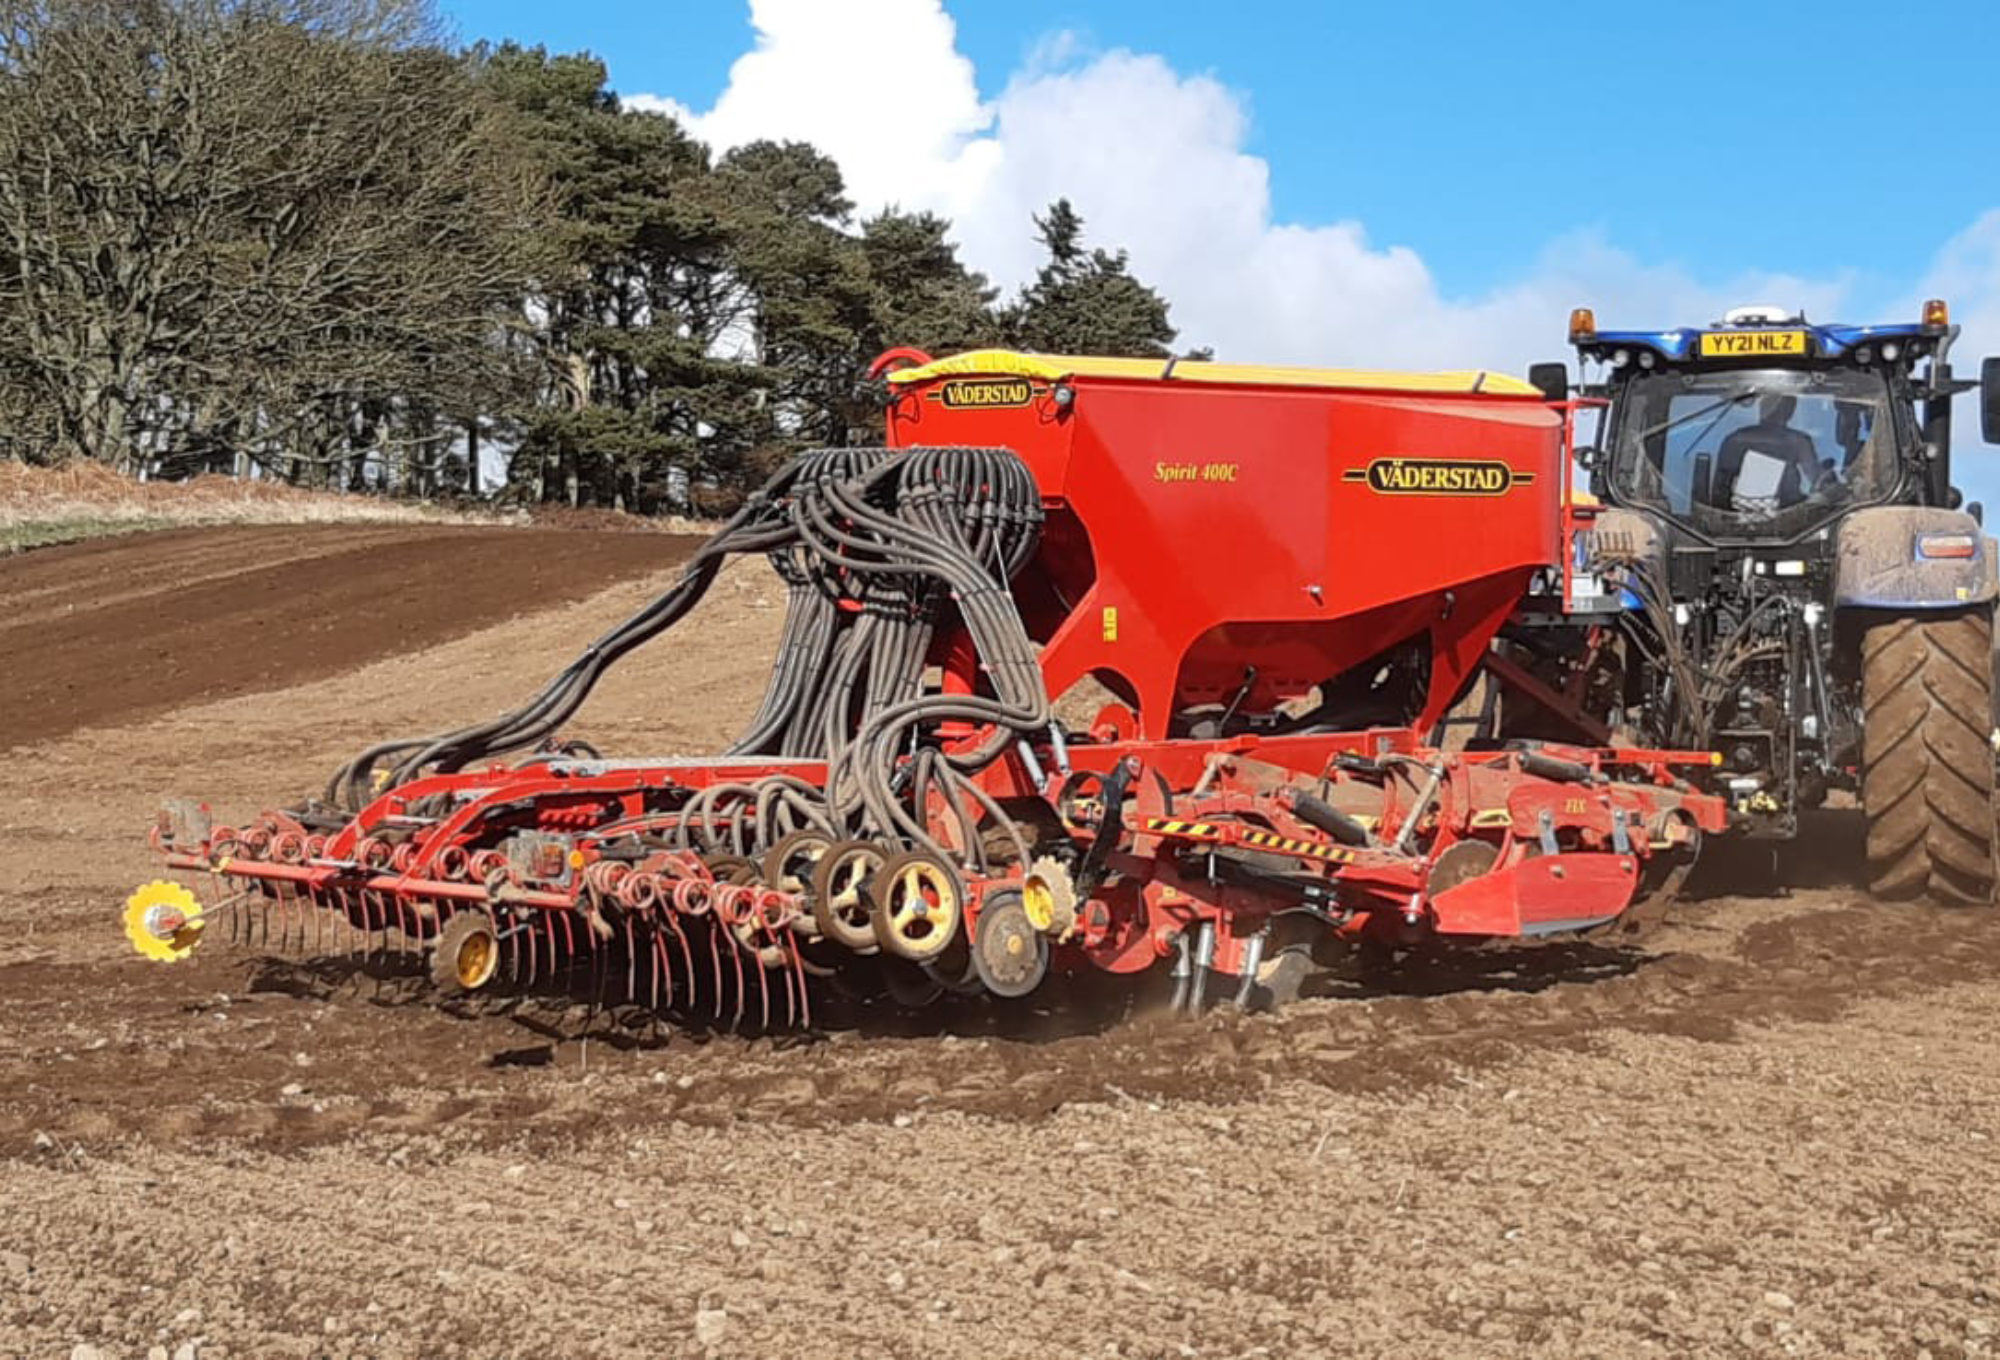 <p>Sow your seeds with the Vaderstad Spirit! </p>
<p><br /></p>